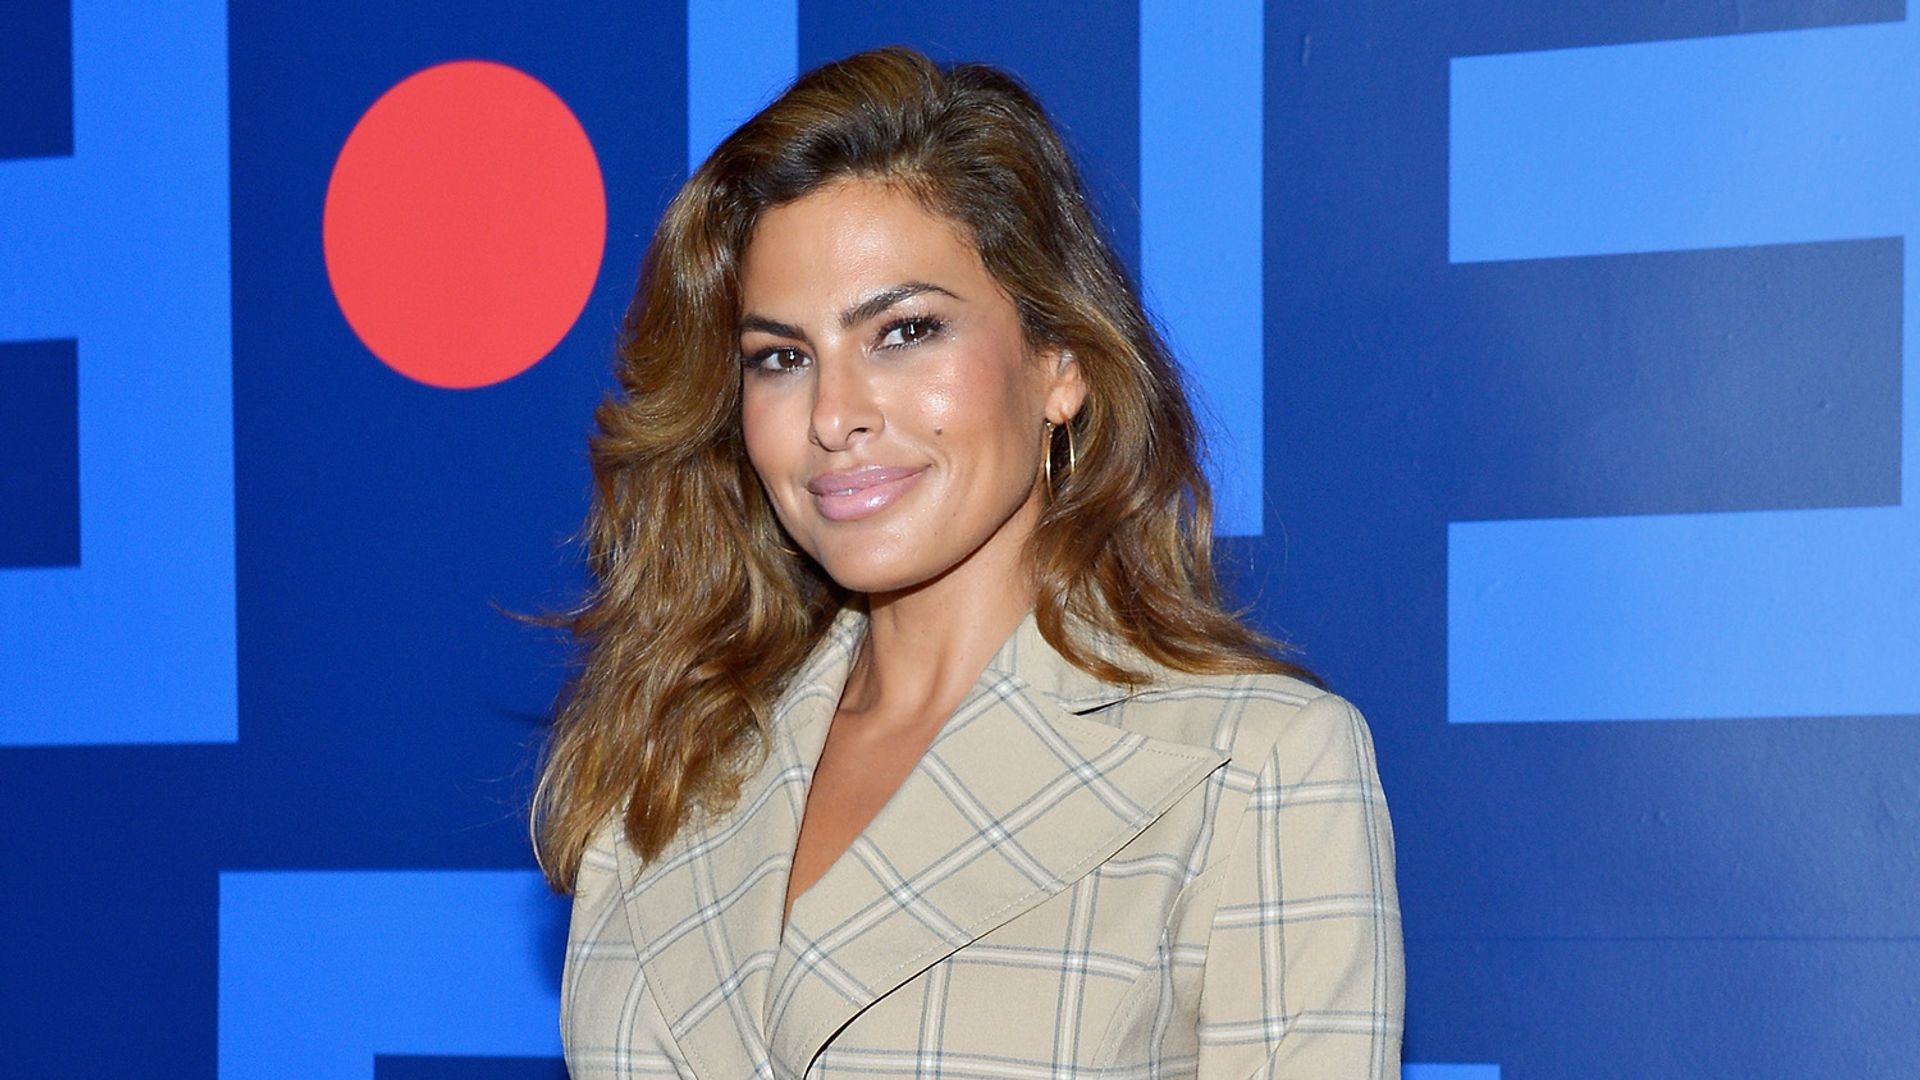 Eva Mendes attends New York & Company Fall Holiday 2018 Fashion Show at The Palace Theatre on September 13, 2018 in Los Angeles, California